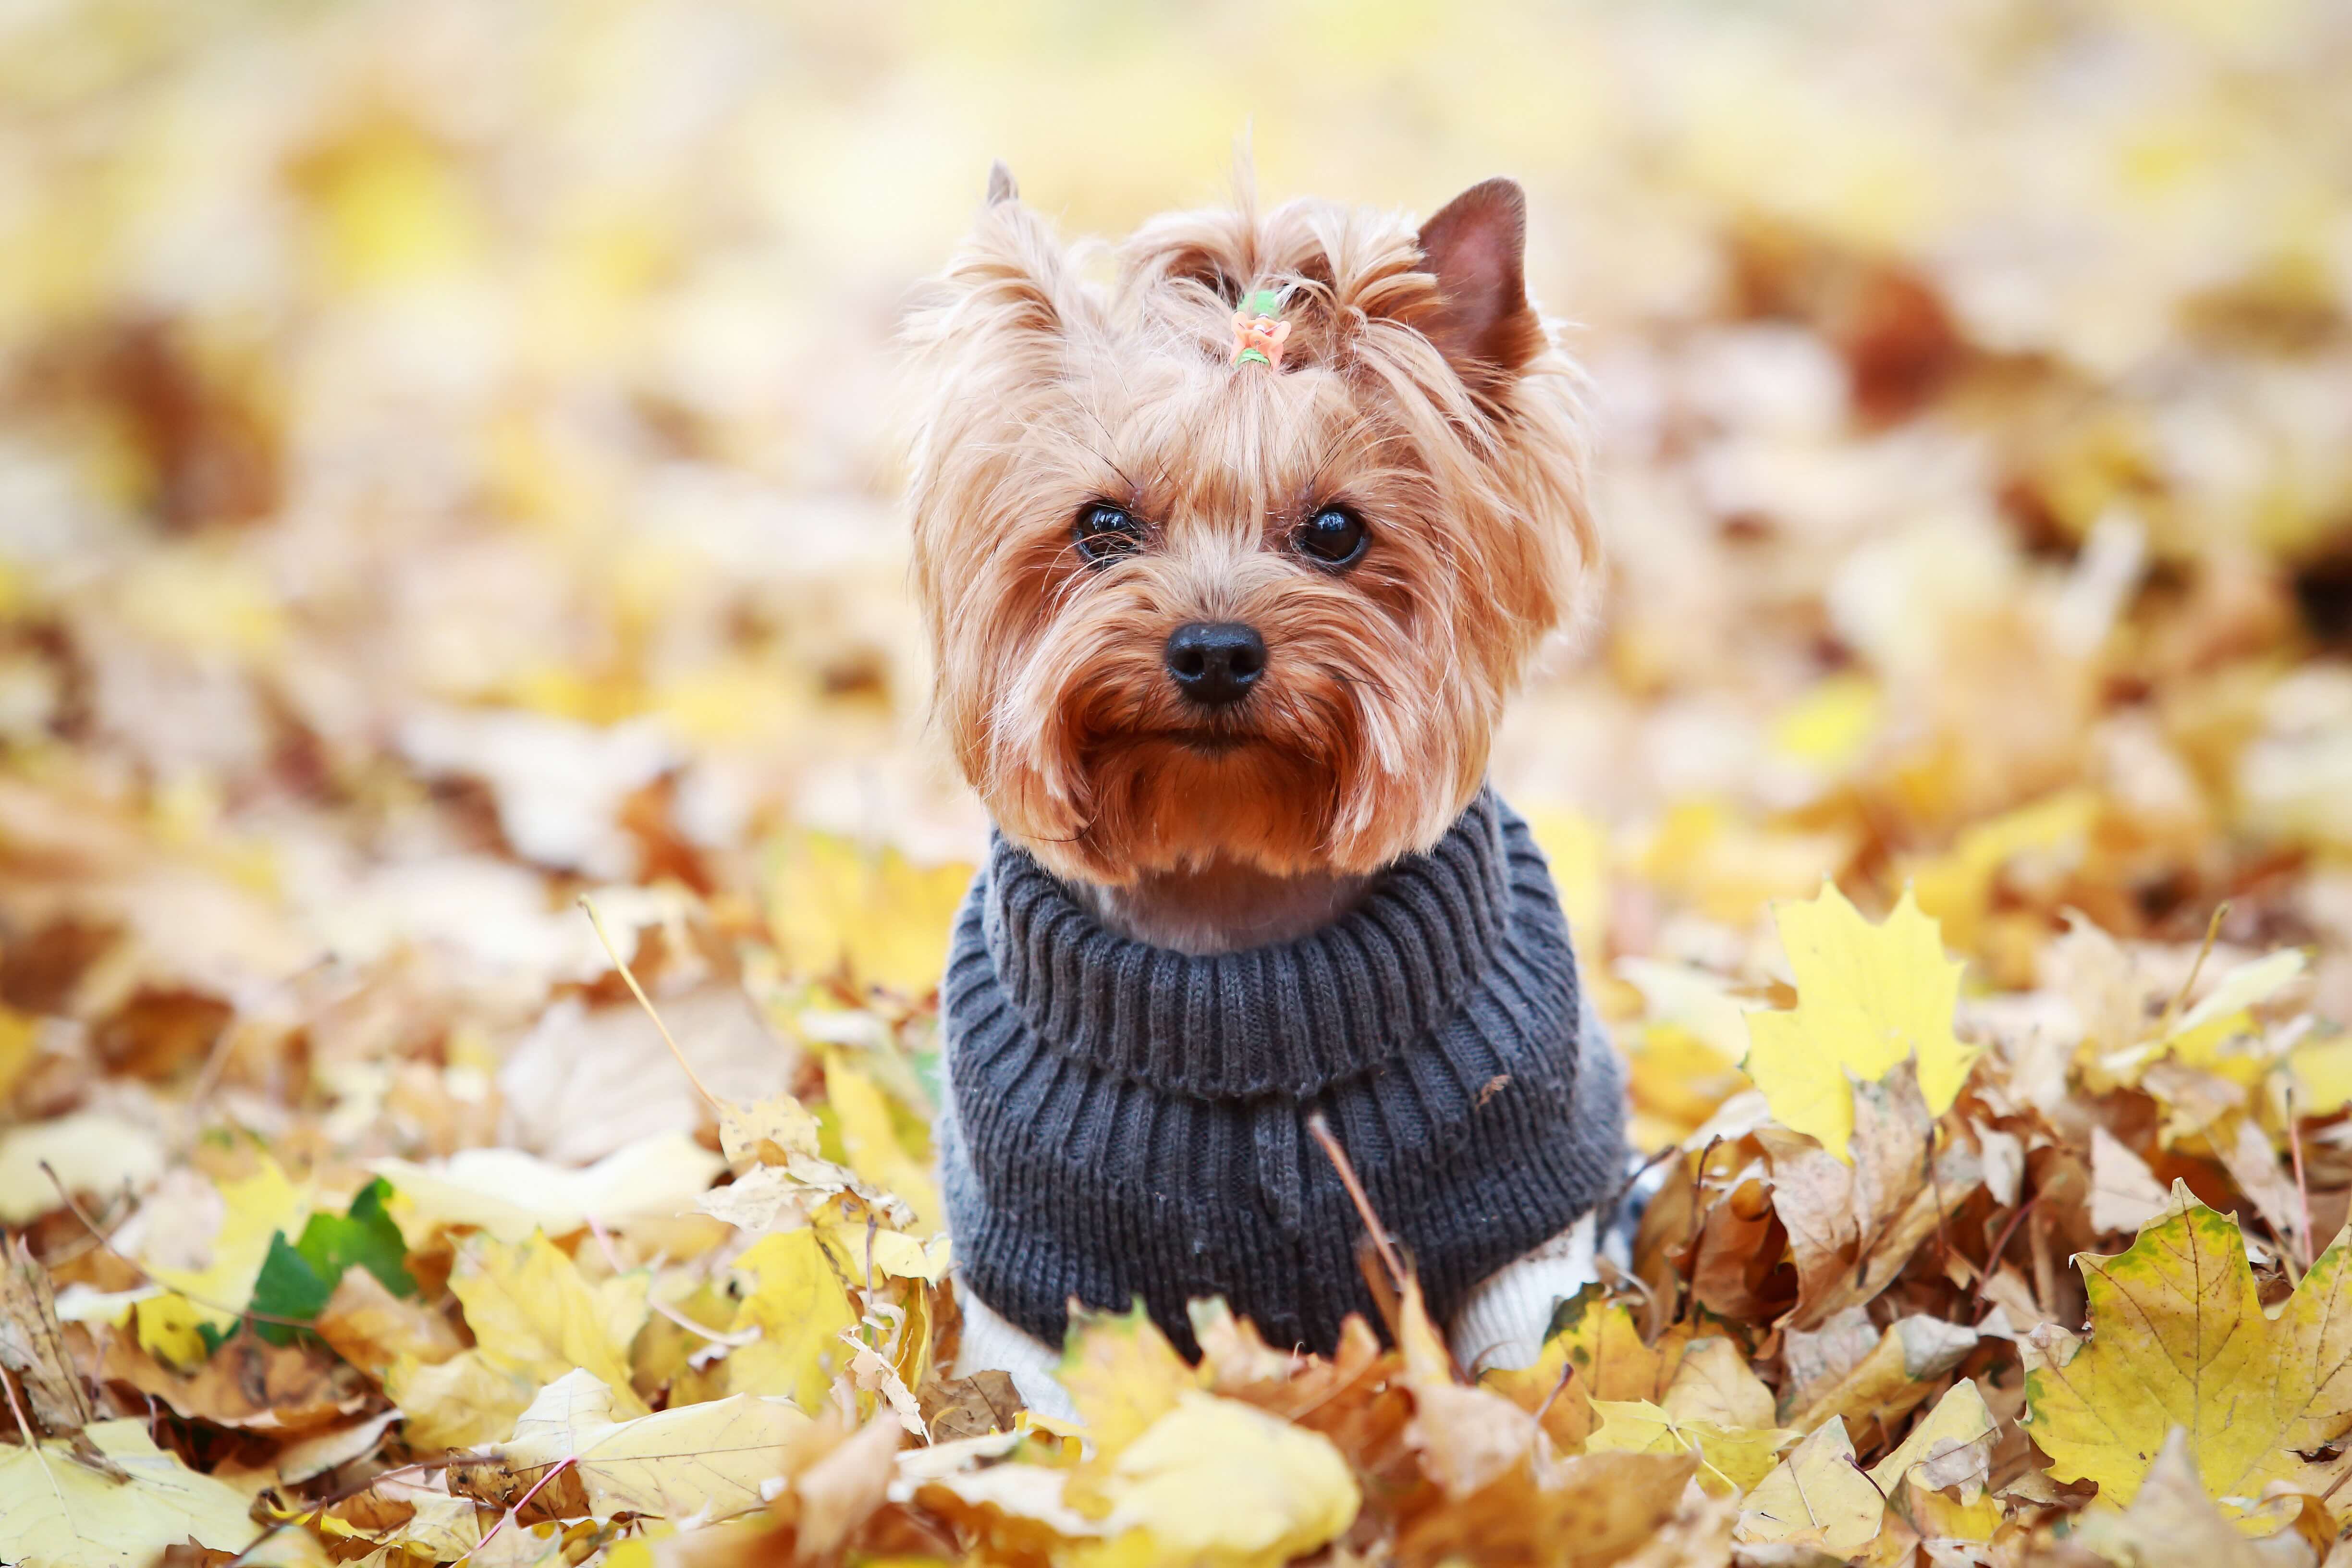 yorkie sitting in autumn leaves and wearing a gray sweater